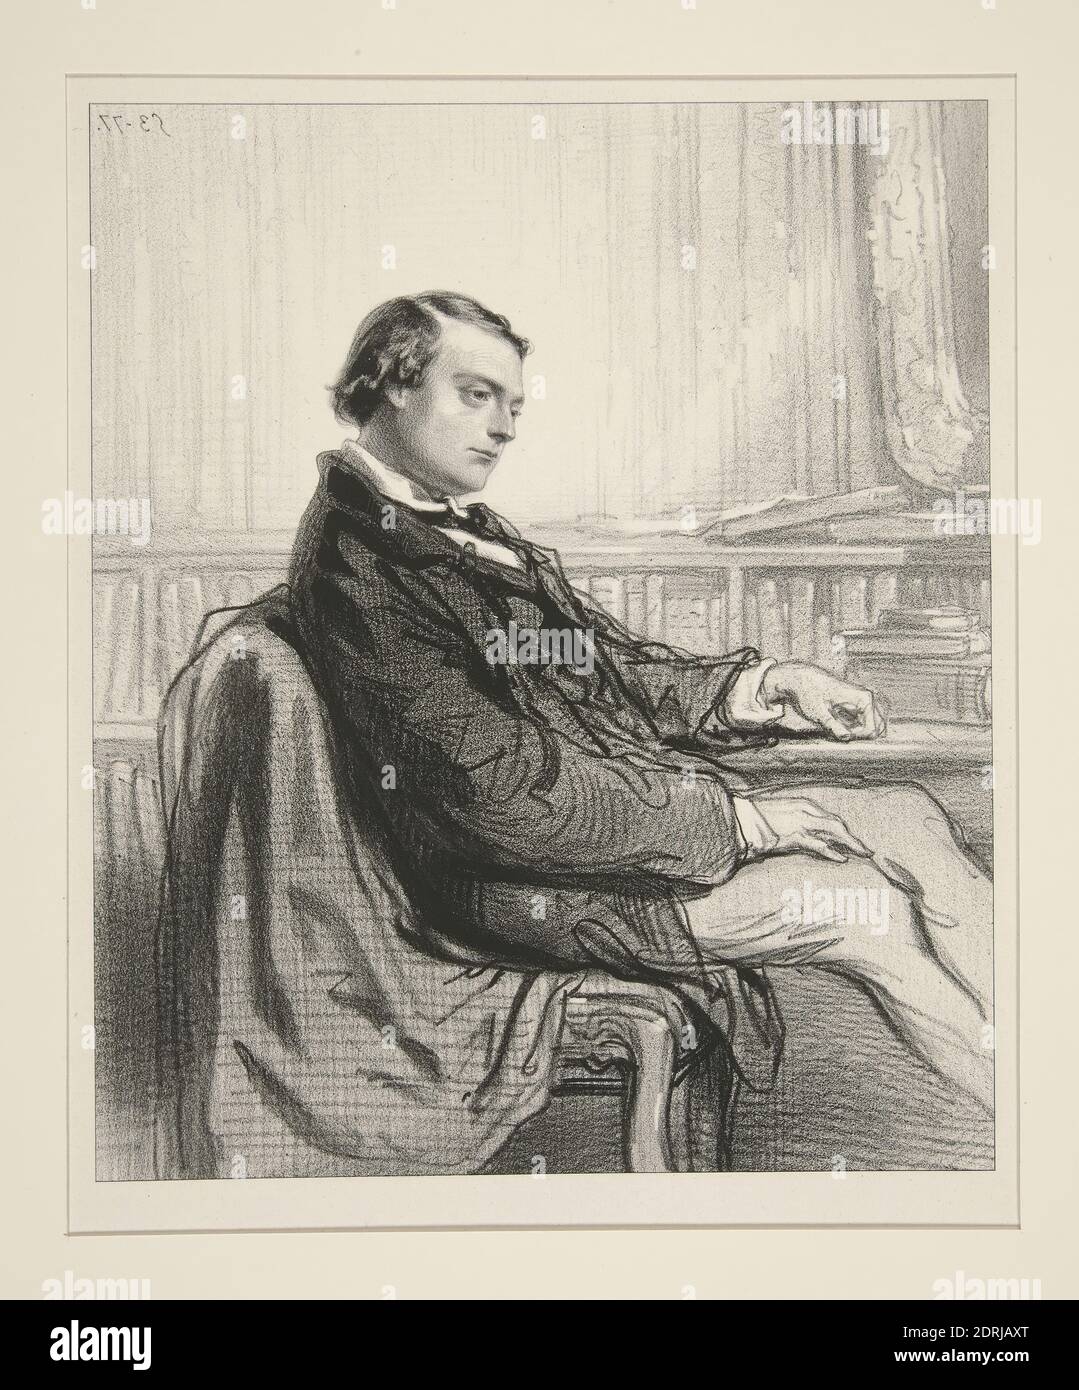 Artist: Paul Gavarni, French, 1804–1866, Theodore de Banville, Lithograph, French, 19th century, Works on Paper - Prints Stock Photo